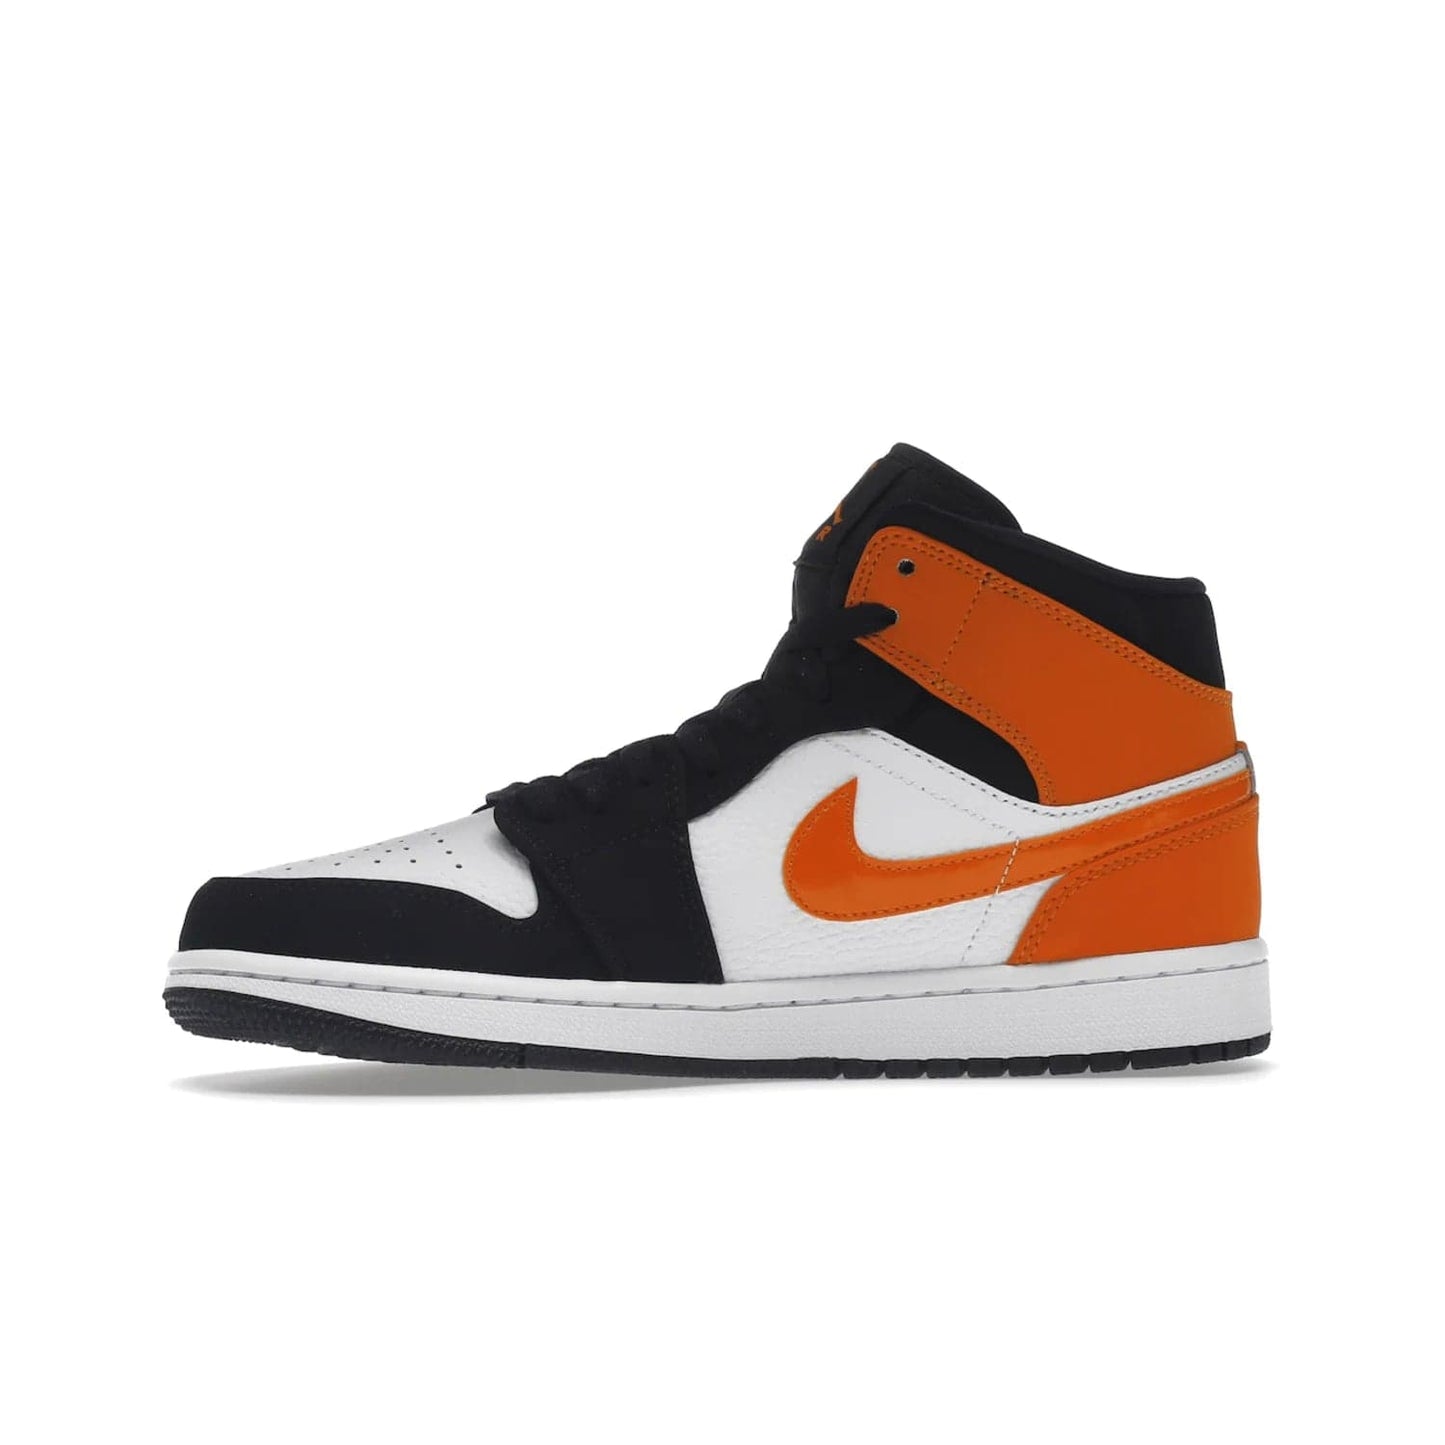 Jordan 1 Mid Shattered Backboard - Image 18 - Only at www.BallersClubKickz.com - The Air Jordan 1 Mid Shattered Backboard offers a timeless Black/White-Starfish colorway. Classic Swoosh logo and AJ insignia plus a shatterd backboard graphic on the insole. Get your pair today!